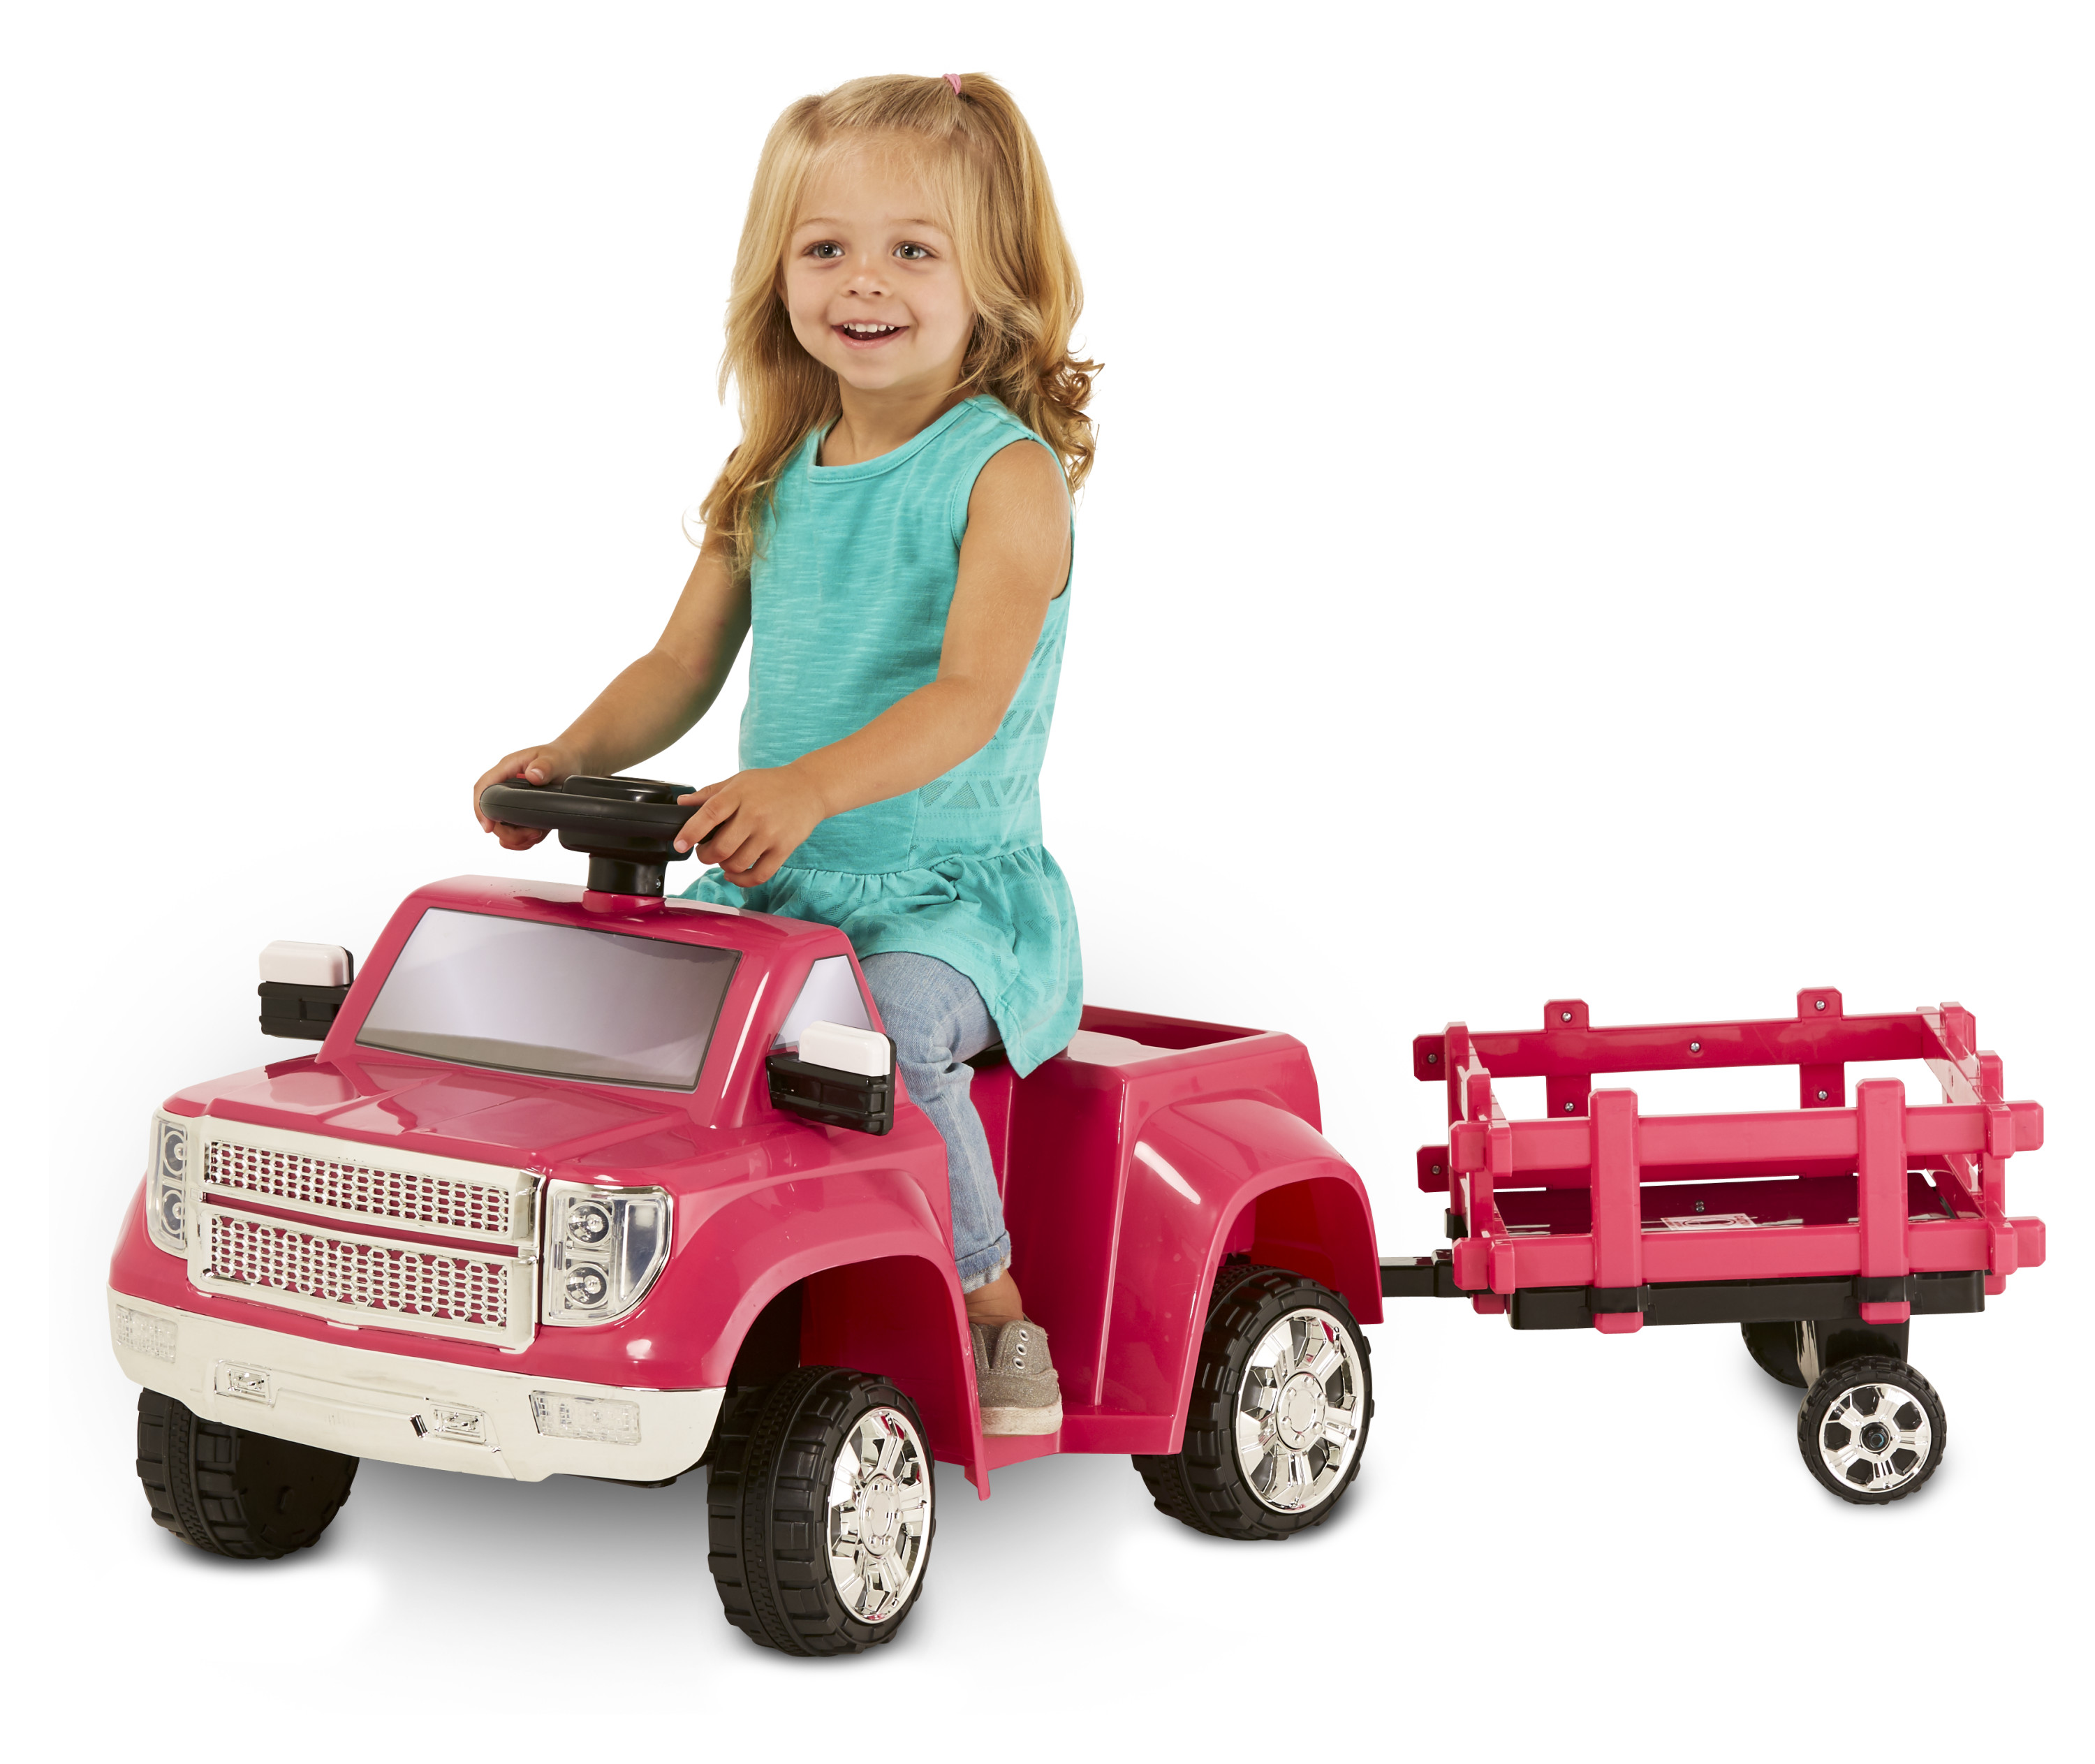 Heavy Hauling Truck with Trailer Toddler Ride-On Toy by Kid Trax, pink - image 1 of 8